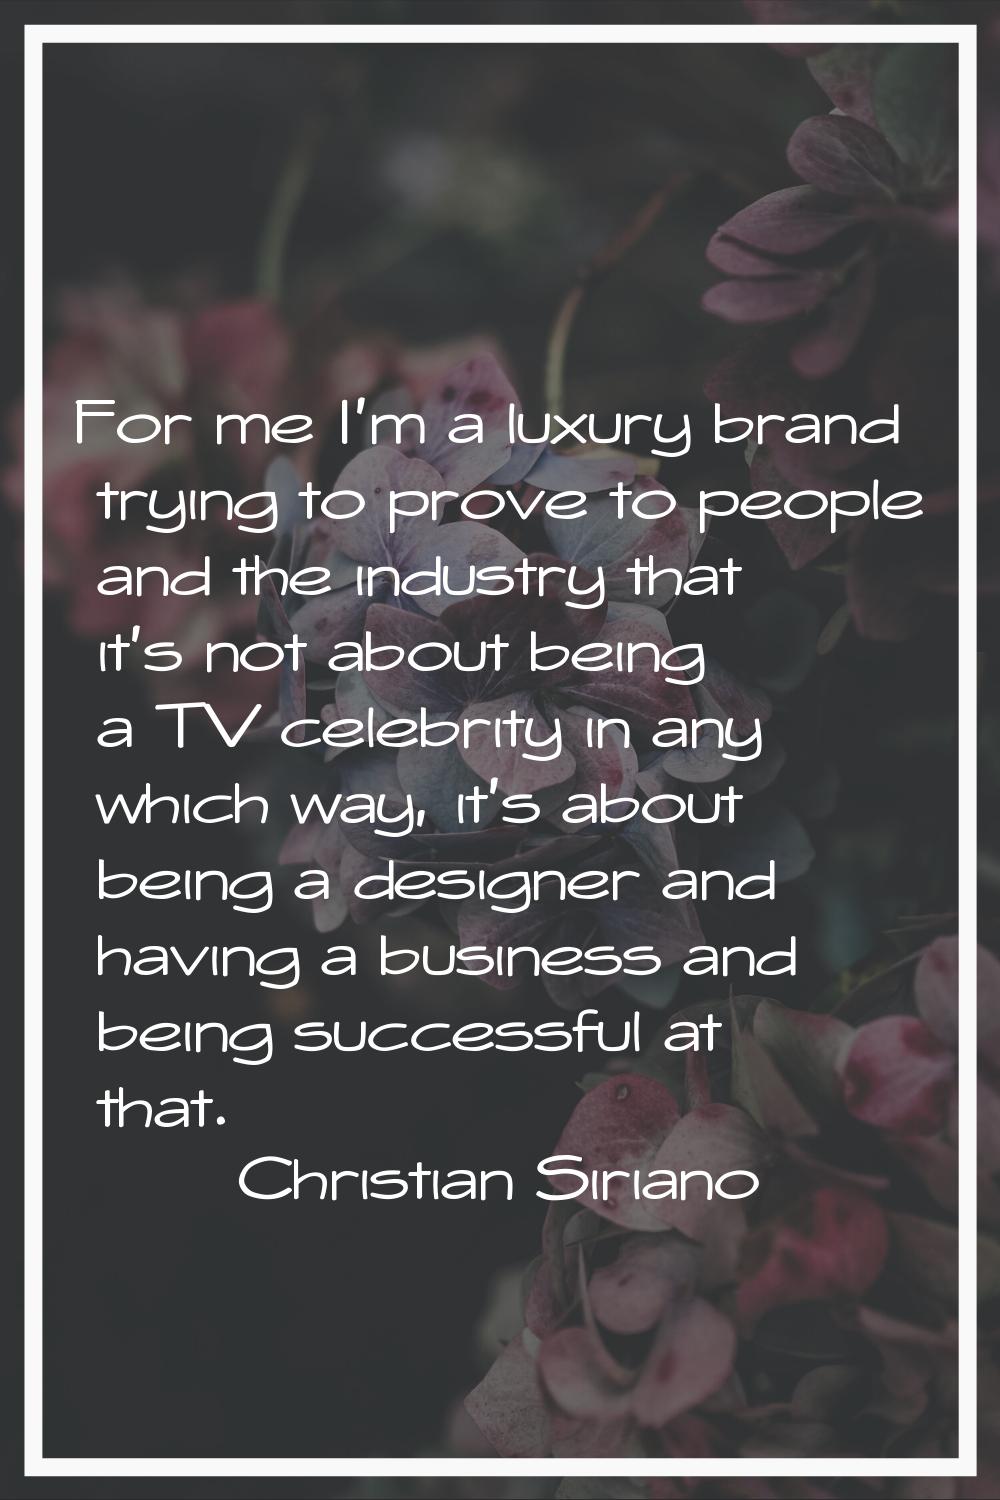 For me I'm a luxury brand trying to prove to people and the industry that it's not about being a TV